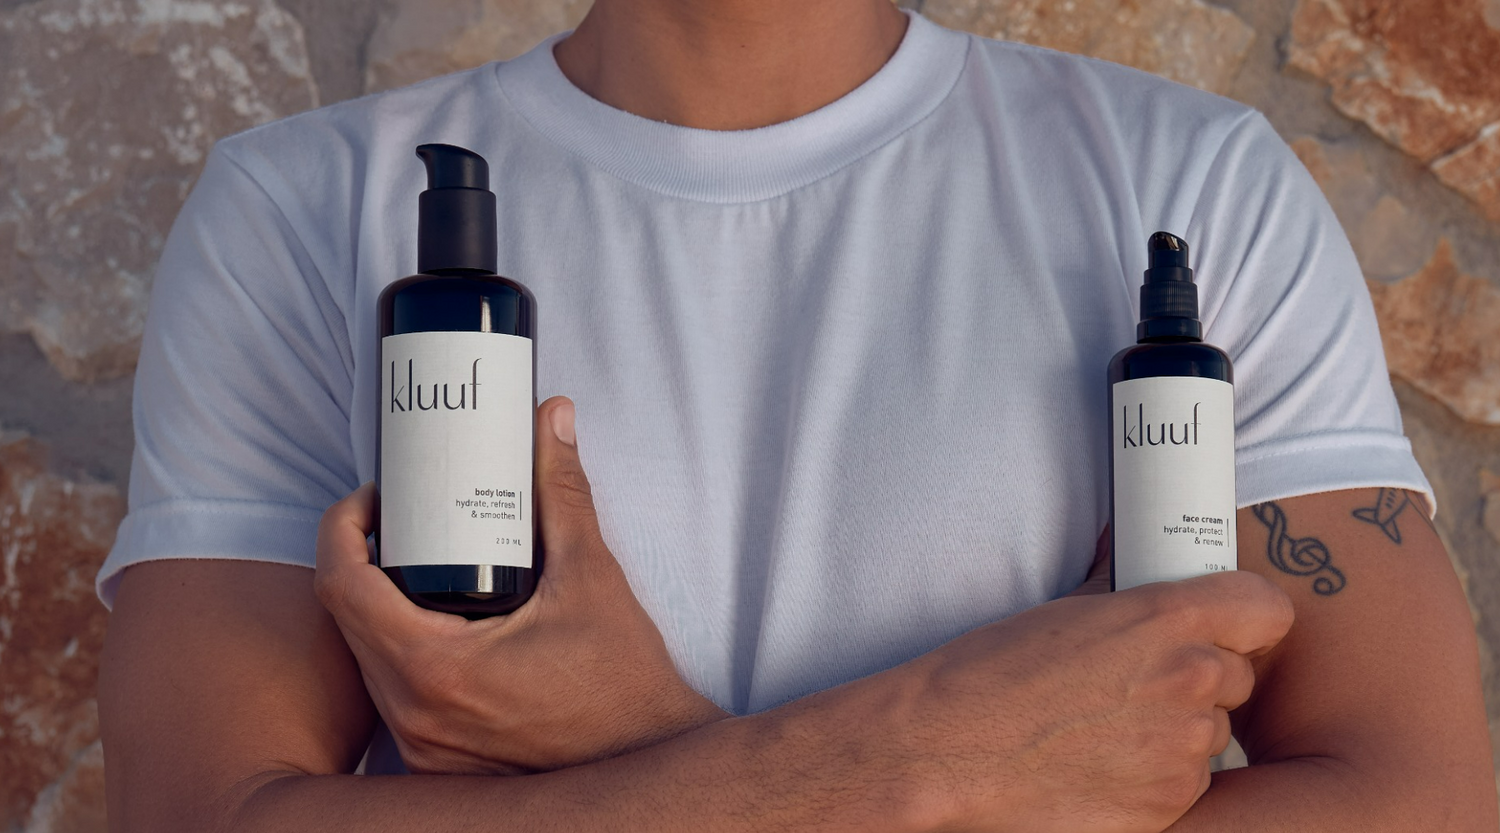 Kluuf's body lotion and face cream held in front of male upper body